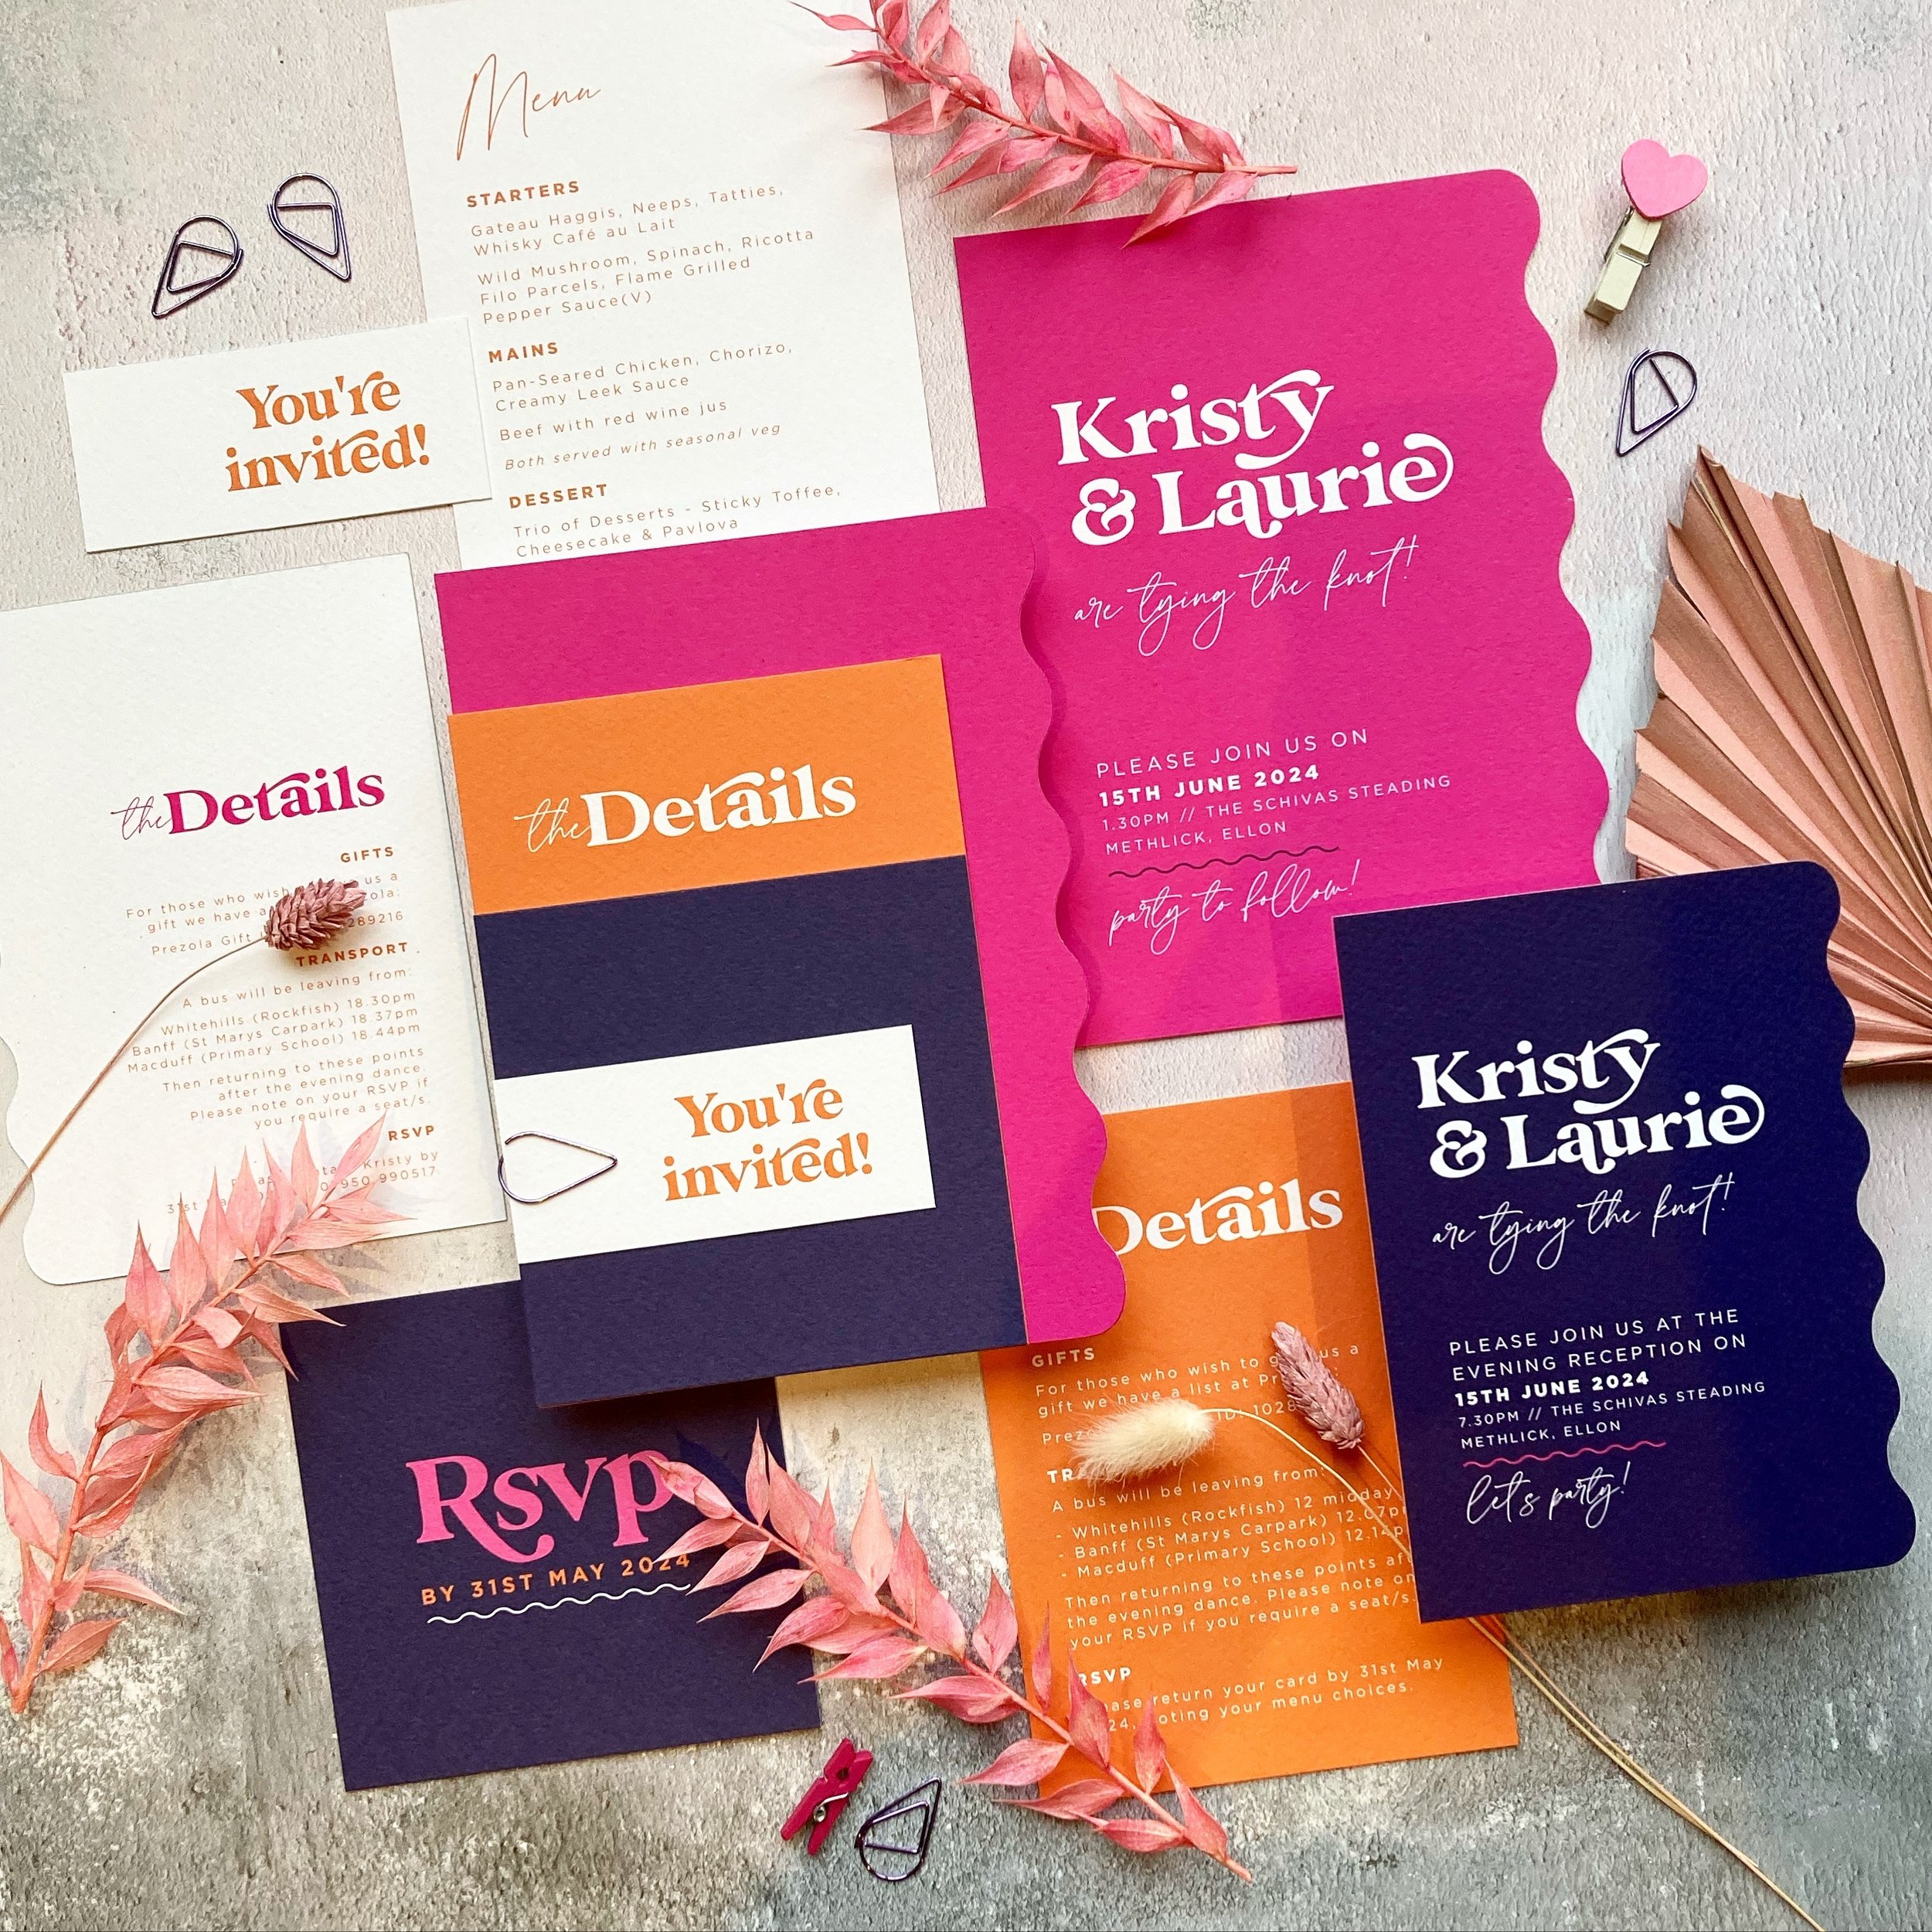 Don&rsquo;t be scared to go BOLD with your stationery - pink, orange and navy layered invitations with a side wave cut👌🏻
⠀⠀⠀⠀
#weddingstationery #weddinginvitations #invitations #prettypaper #lovepaperco #pursuepretty #modernweddingstationery #scot